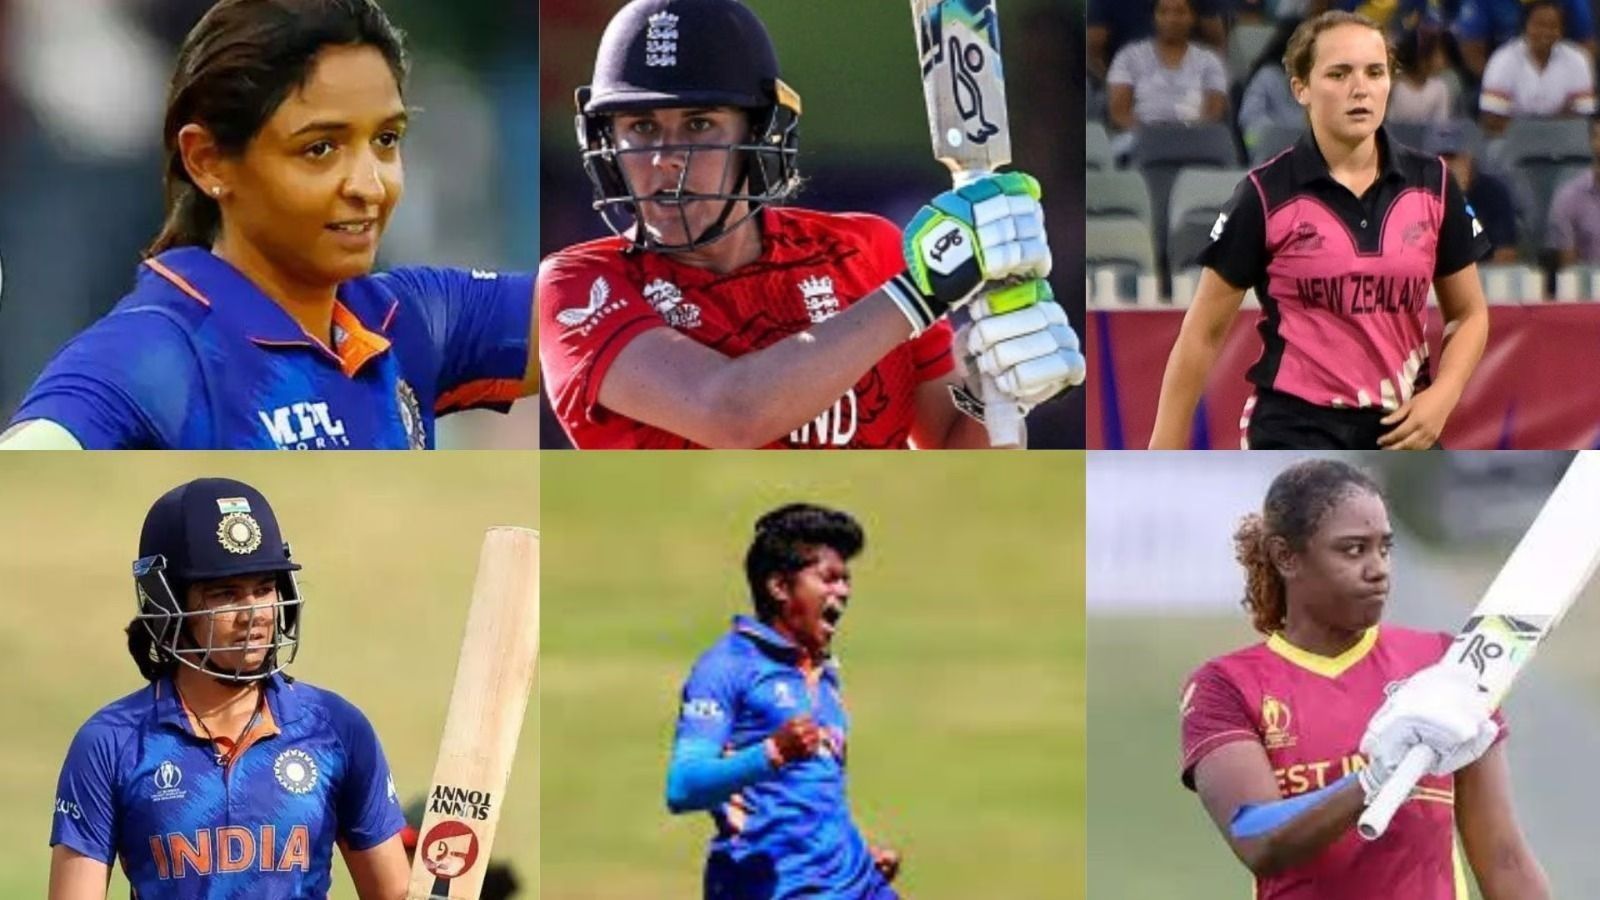 The Mumbai Indians have a formidable mix of Indian and overseas players.